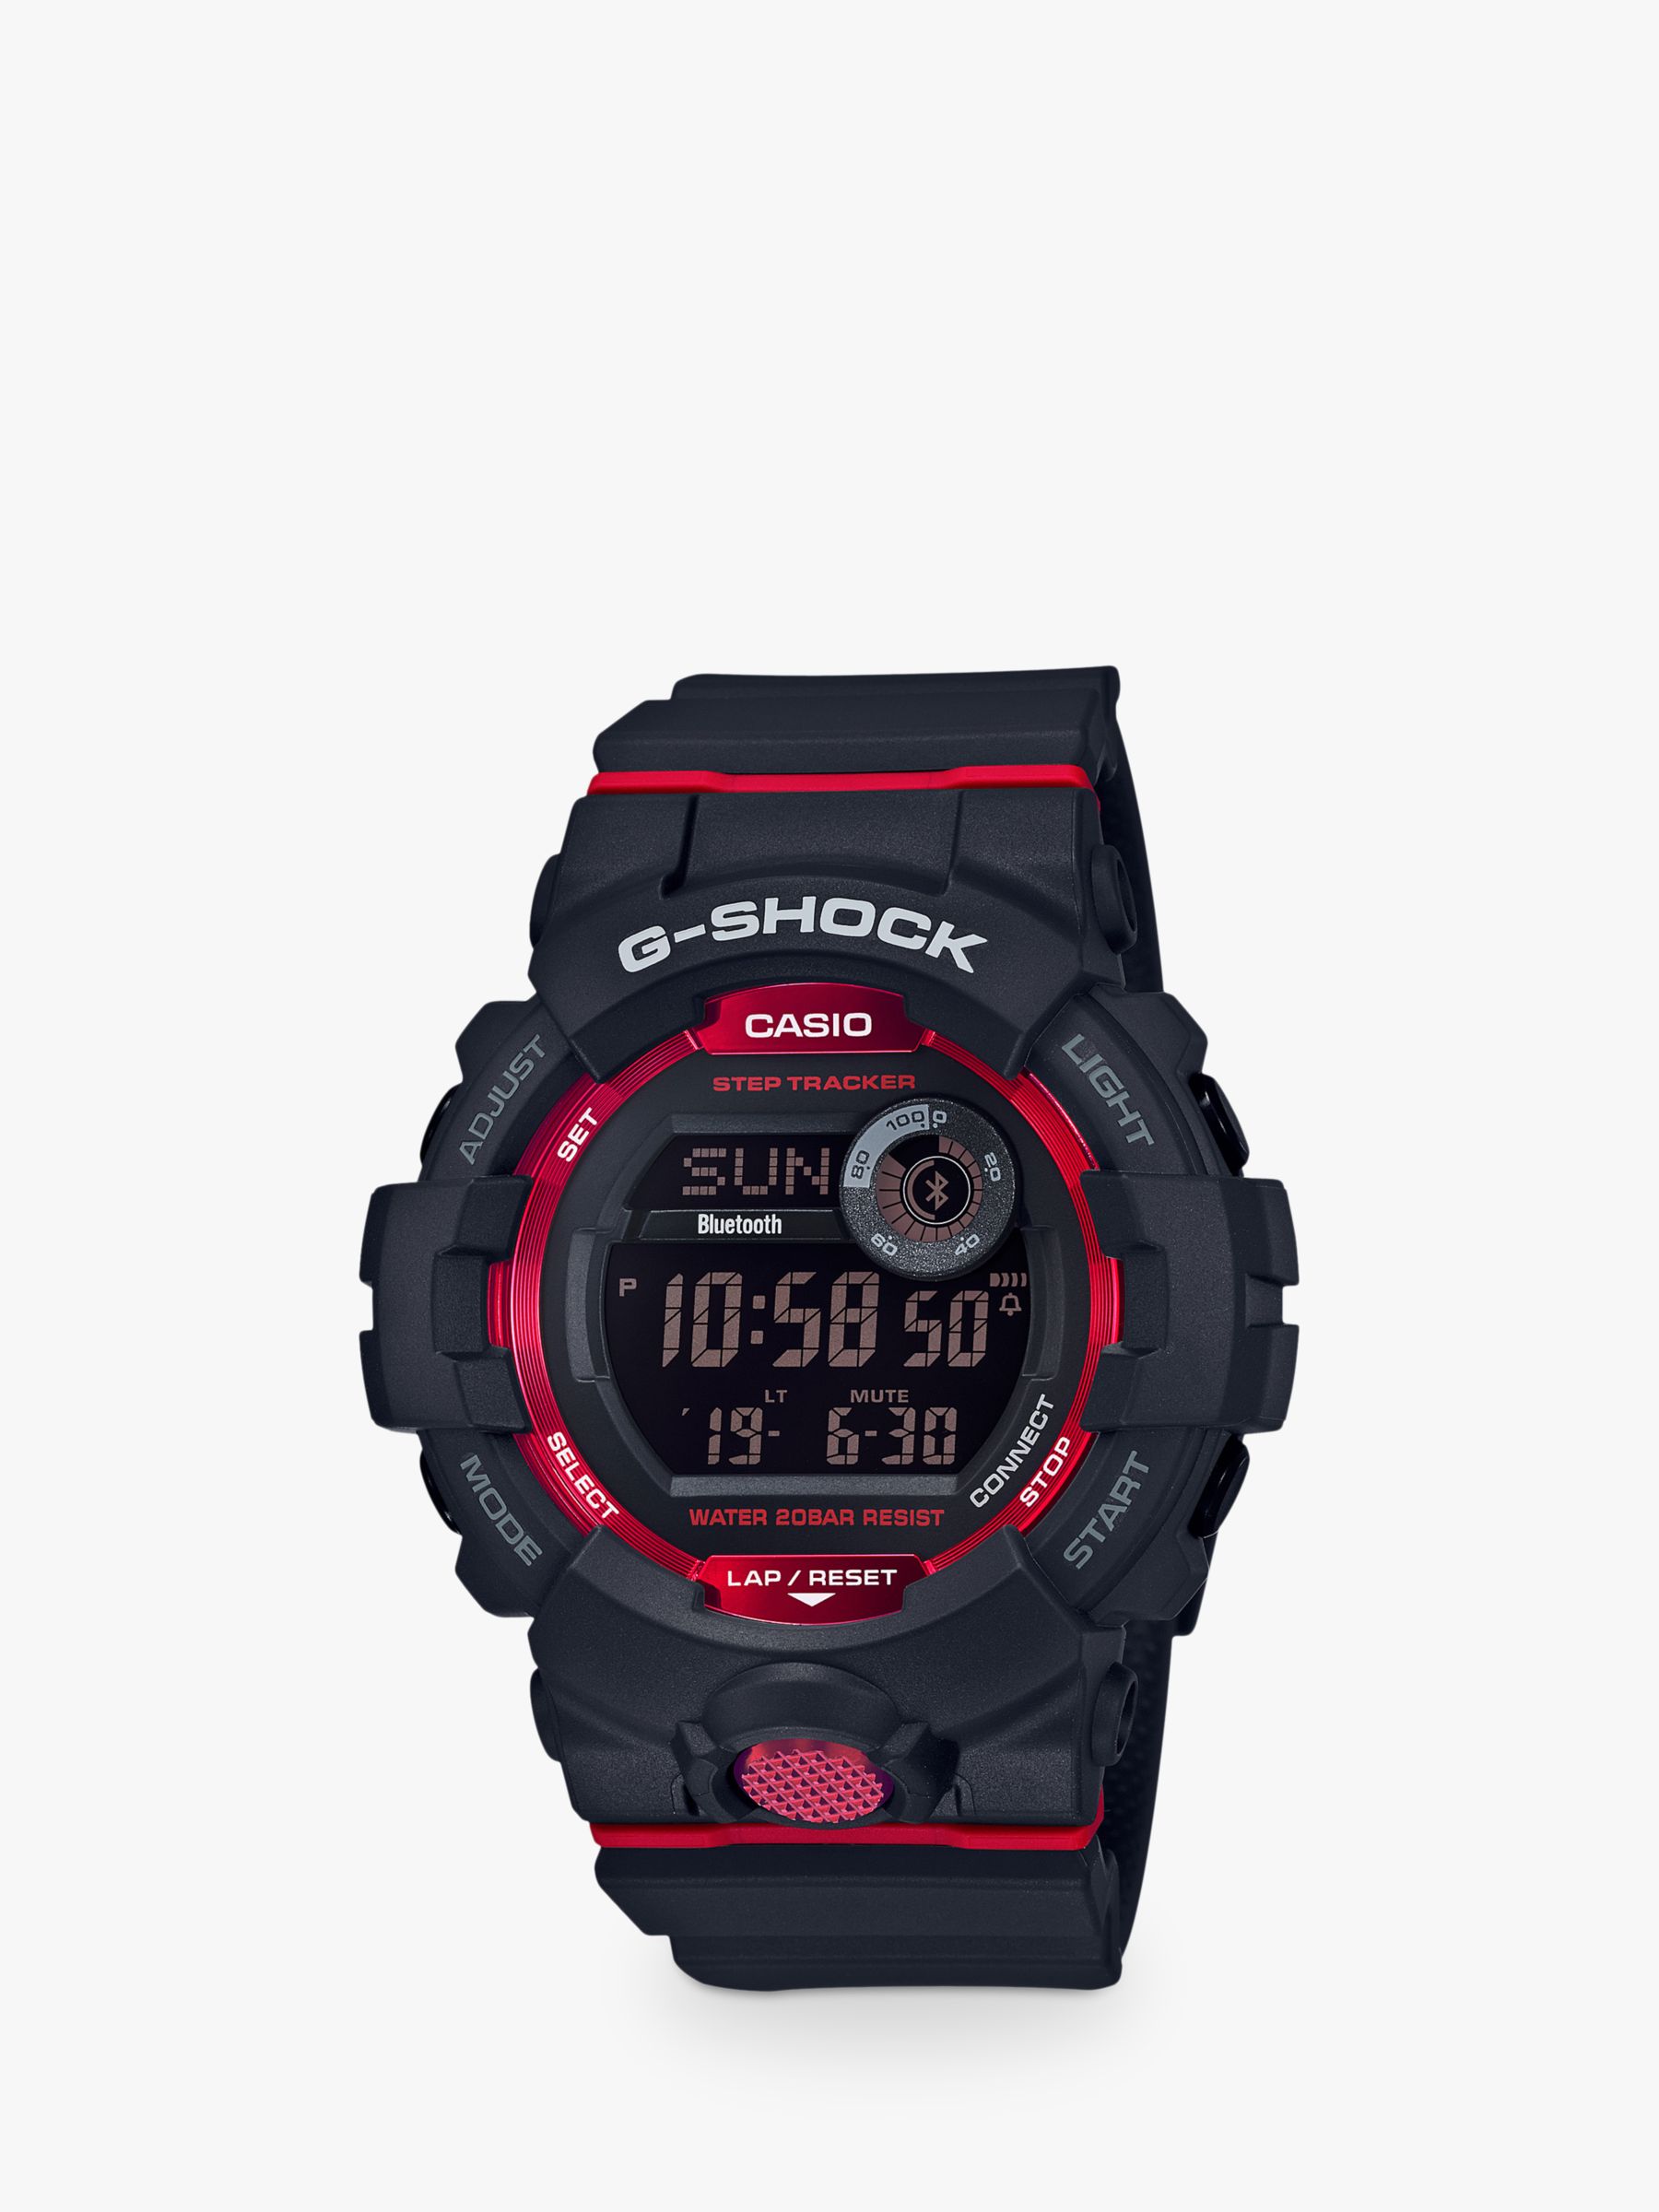 Casio Men S G Shock Connected Bluetooth Resin Strap Watch At John Lewis Partners